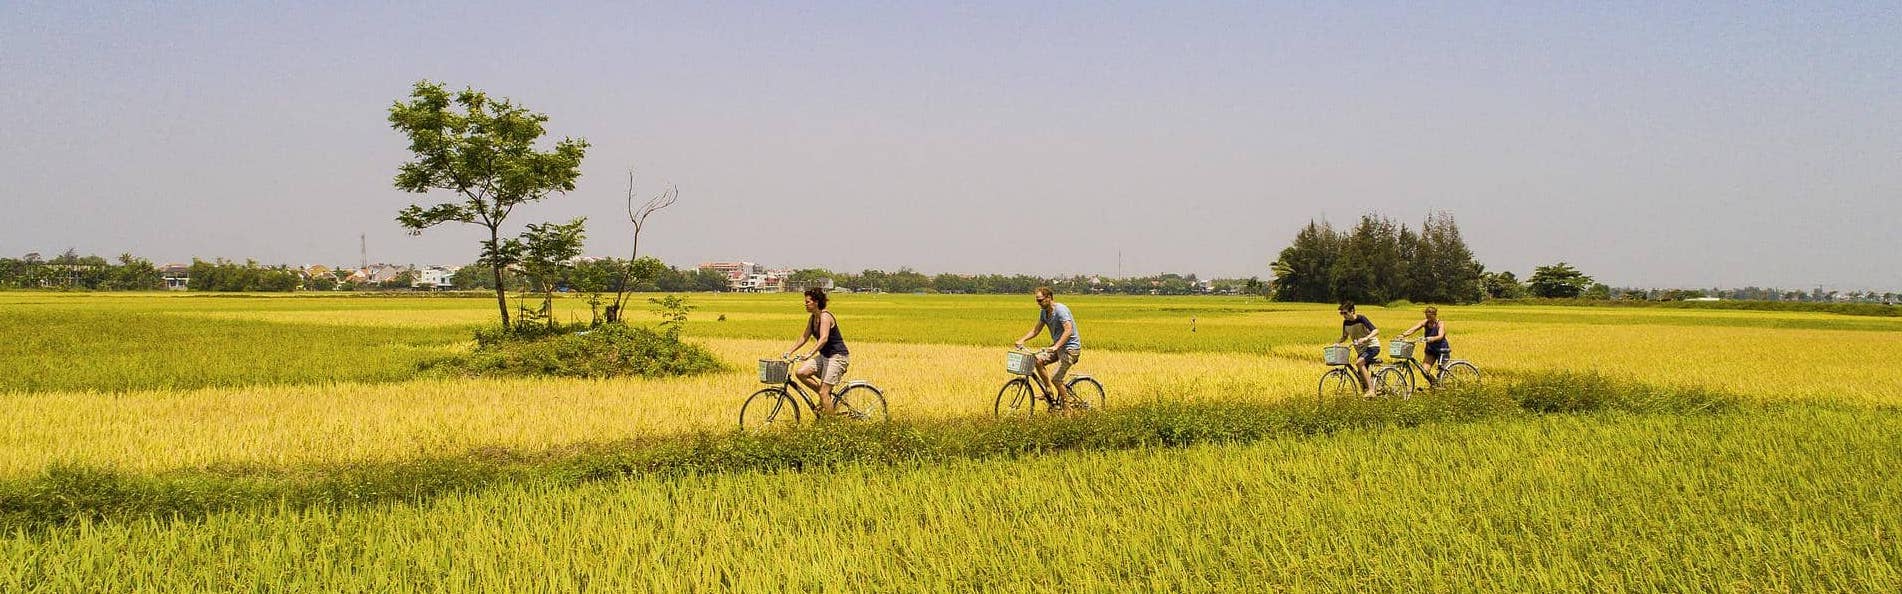 Cyclists ride through fields